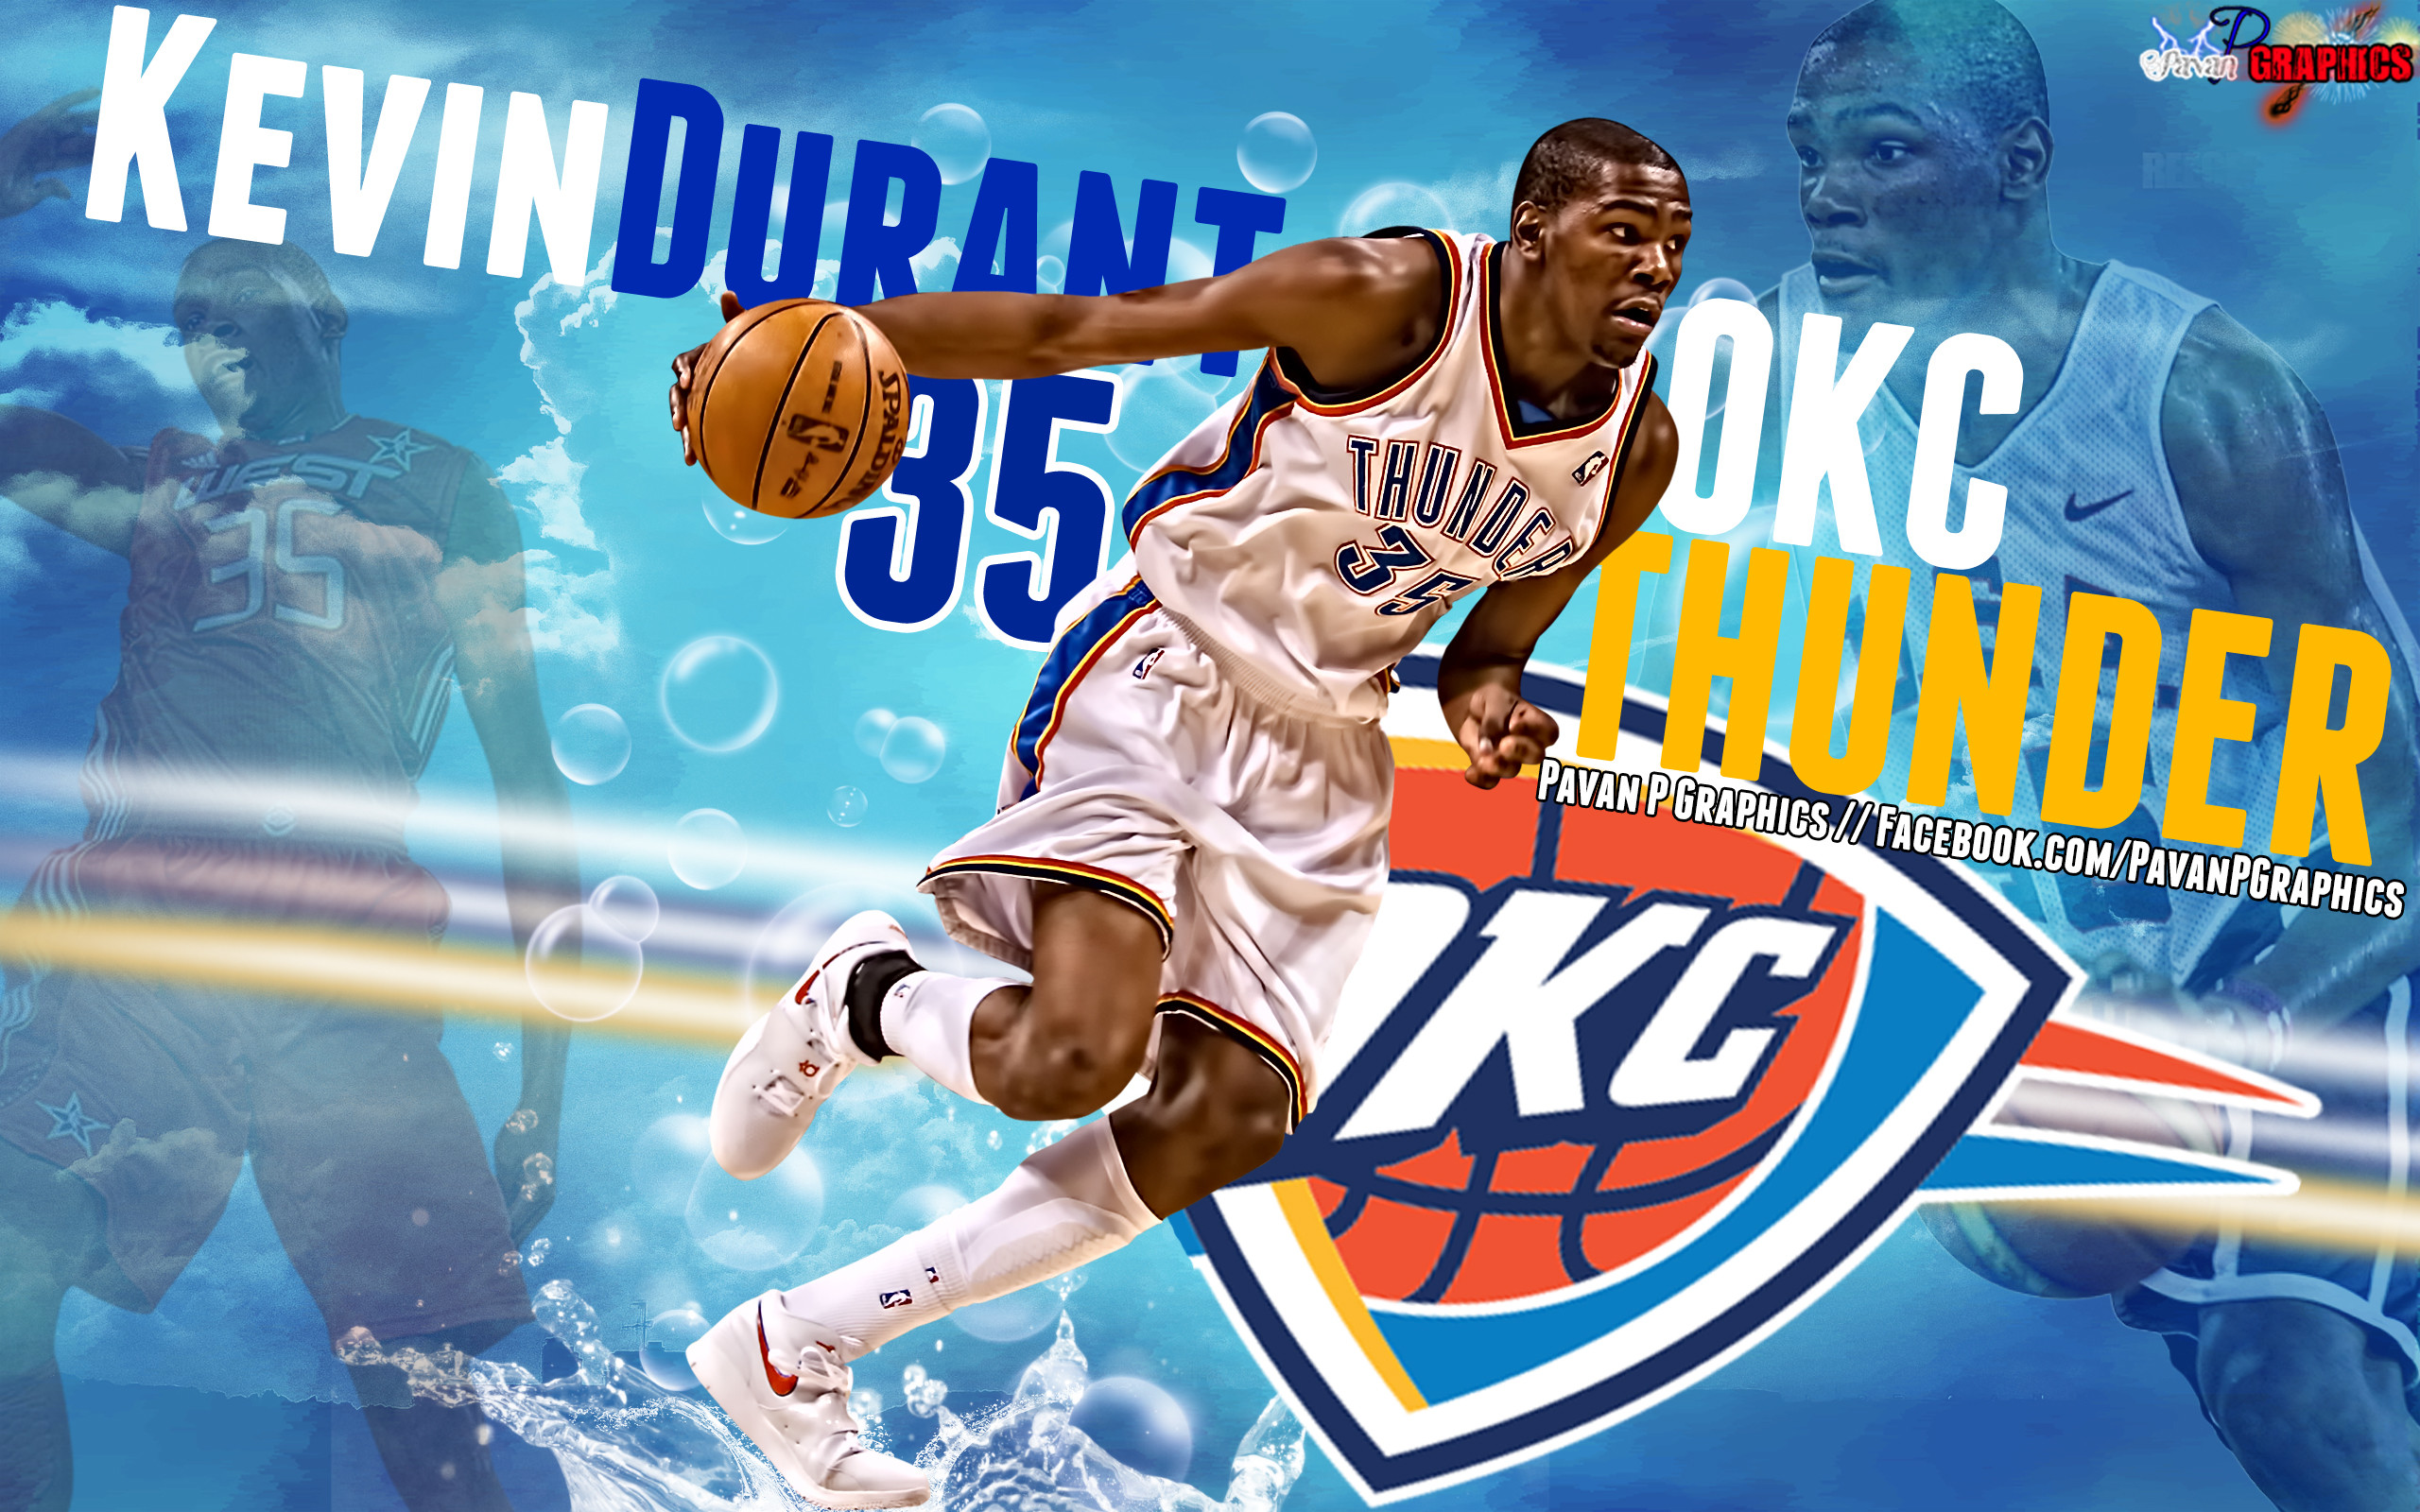 2560x1600 Celebrities Kevin Durant Streetball Wallpaper Kevin Durant Wallpaper